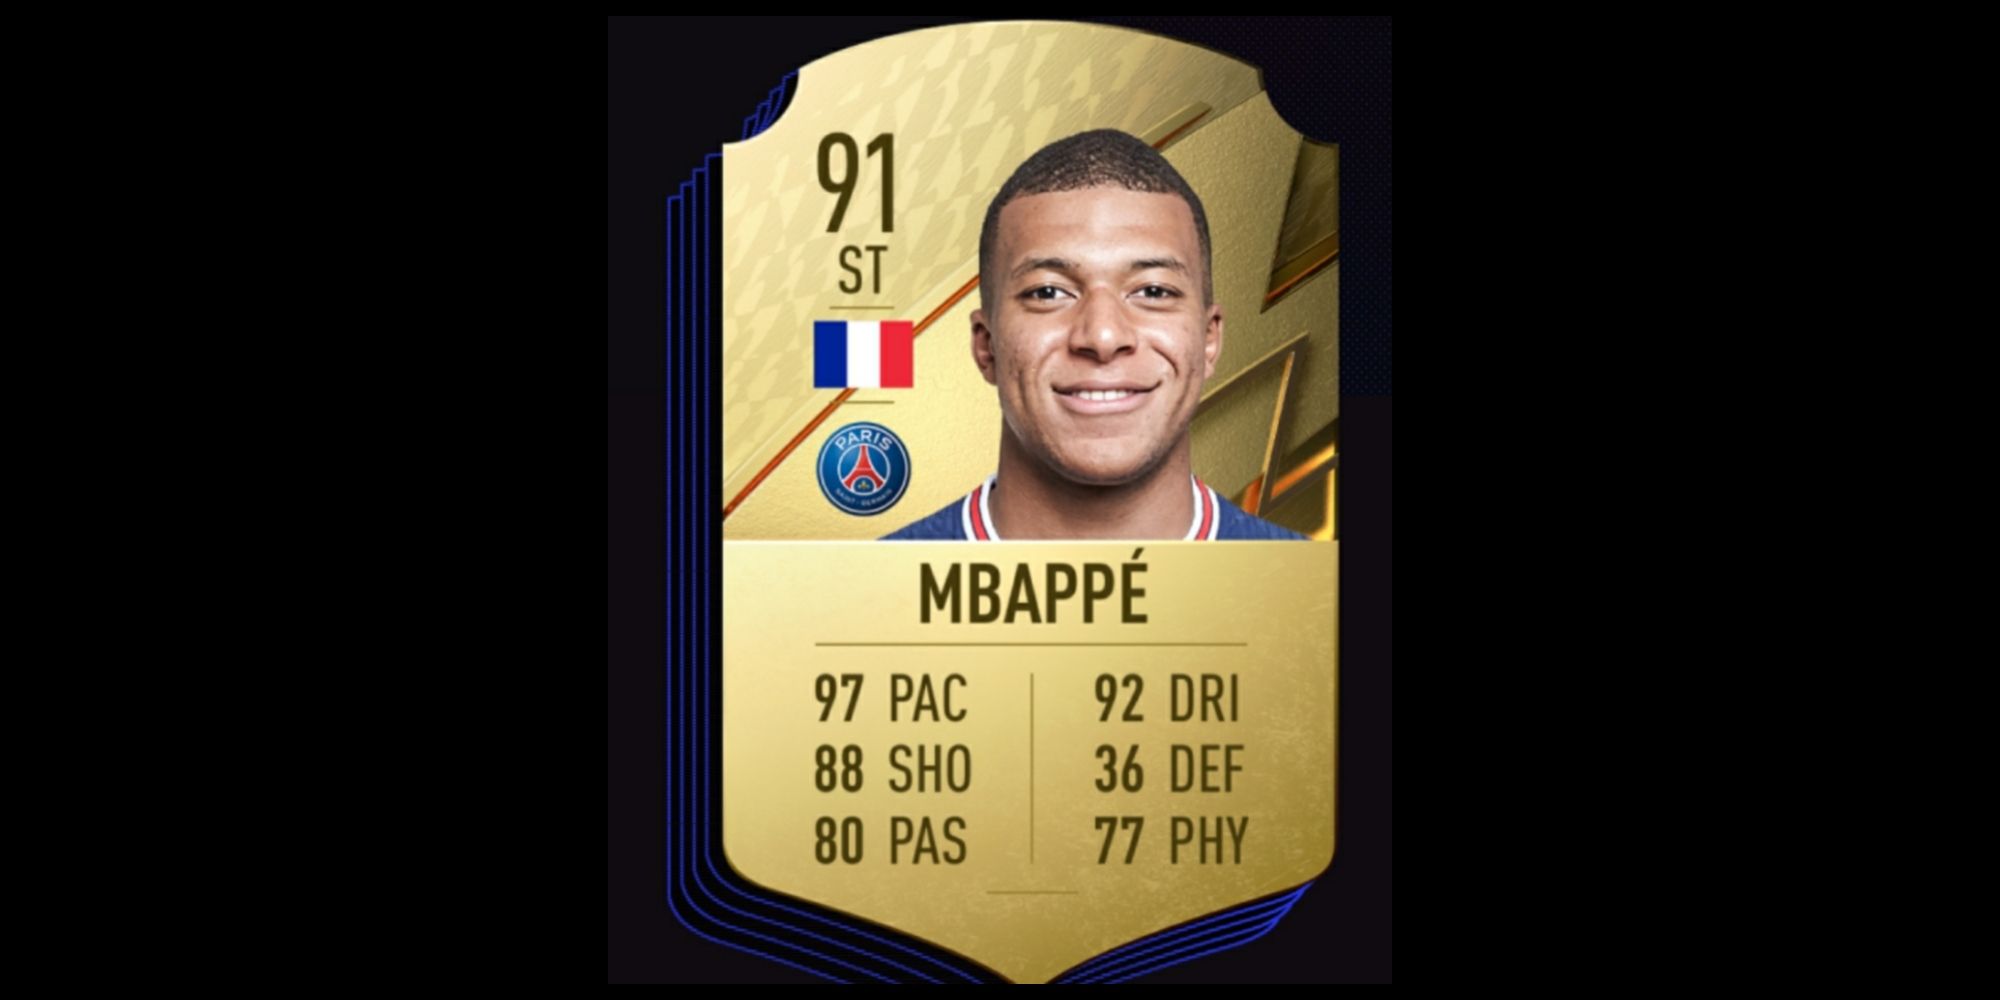 Mbappe card in FIFA 22